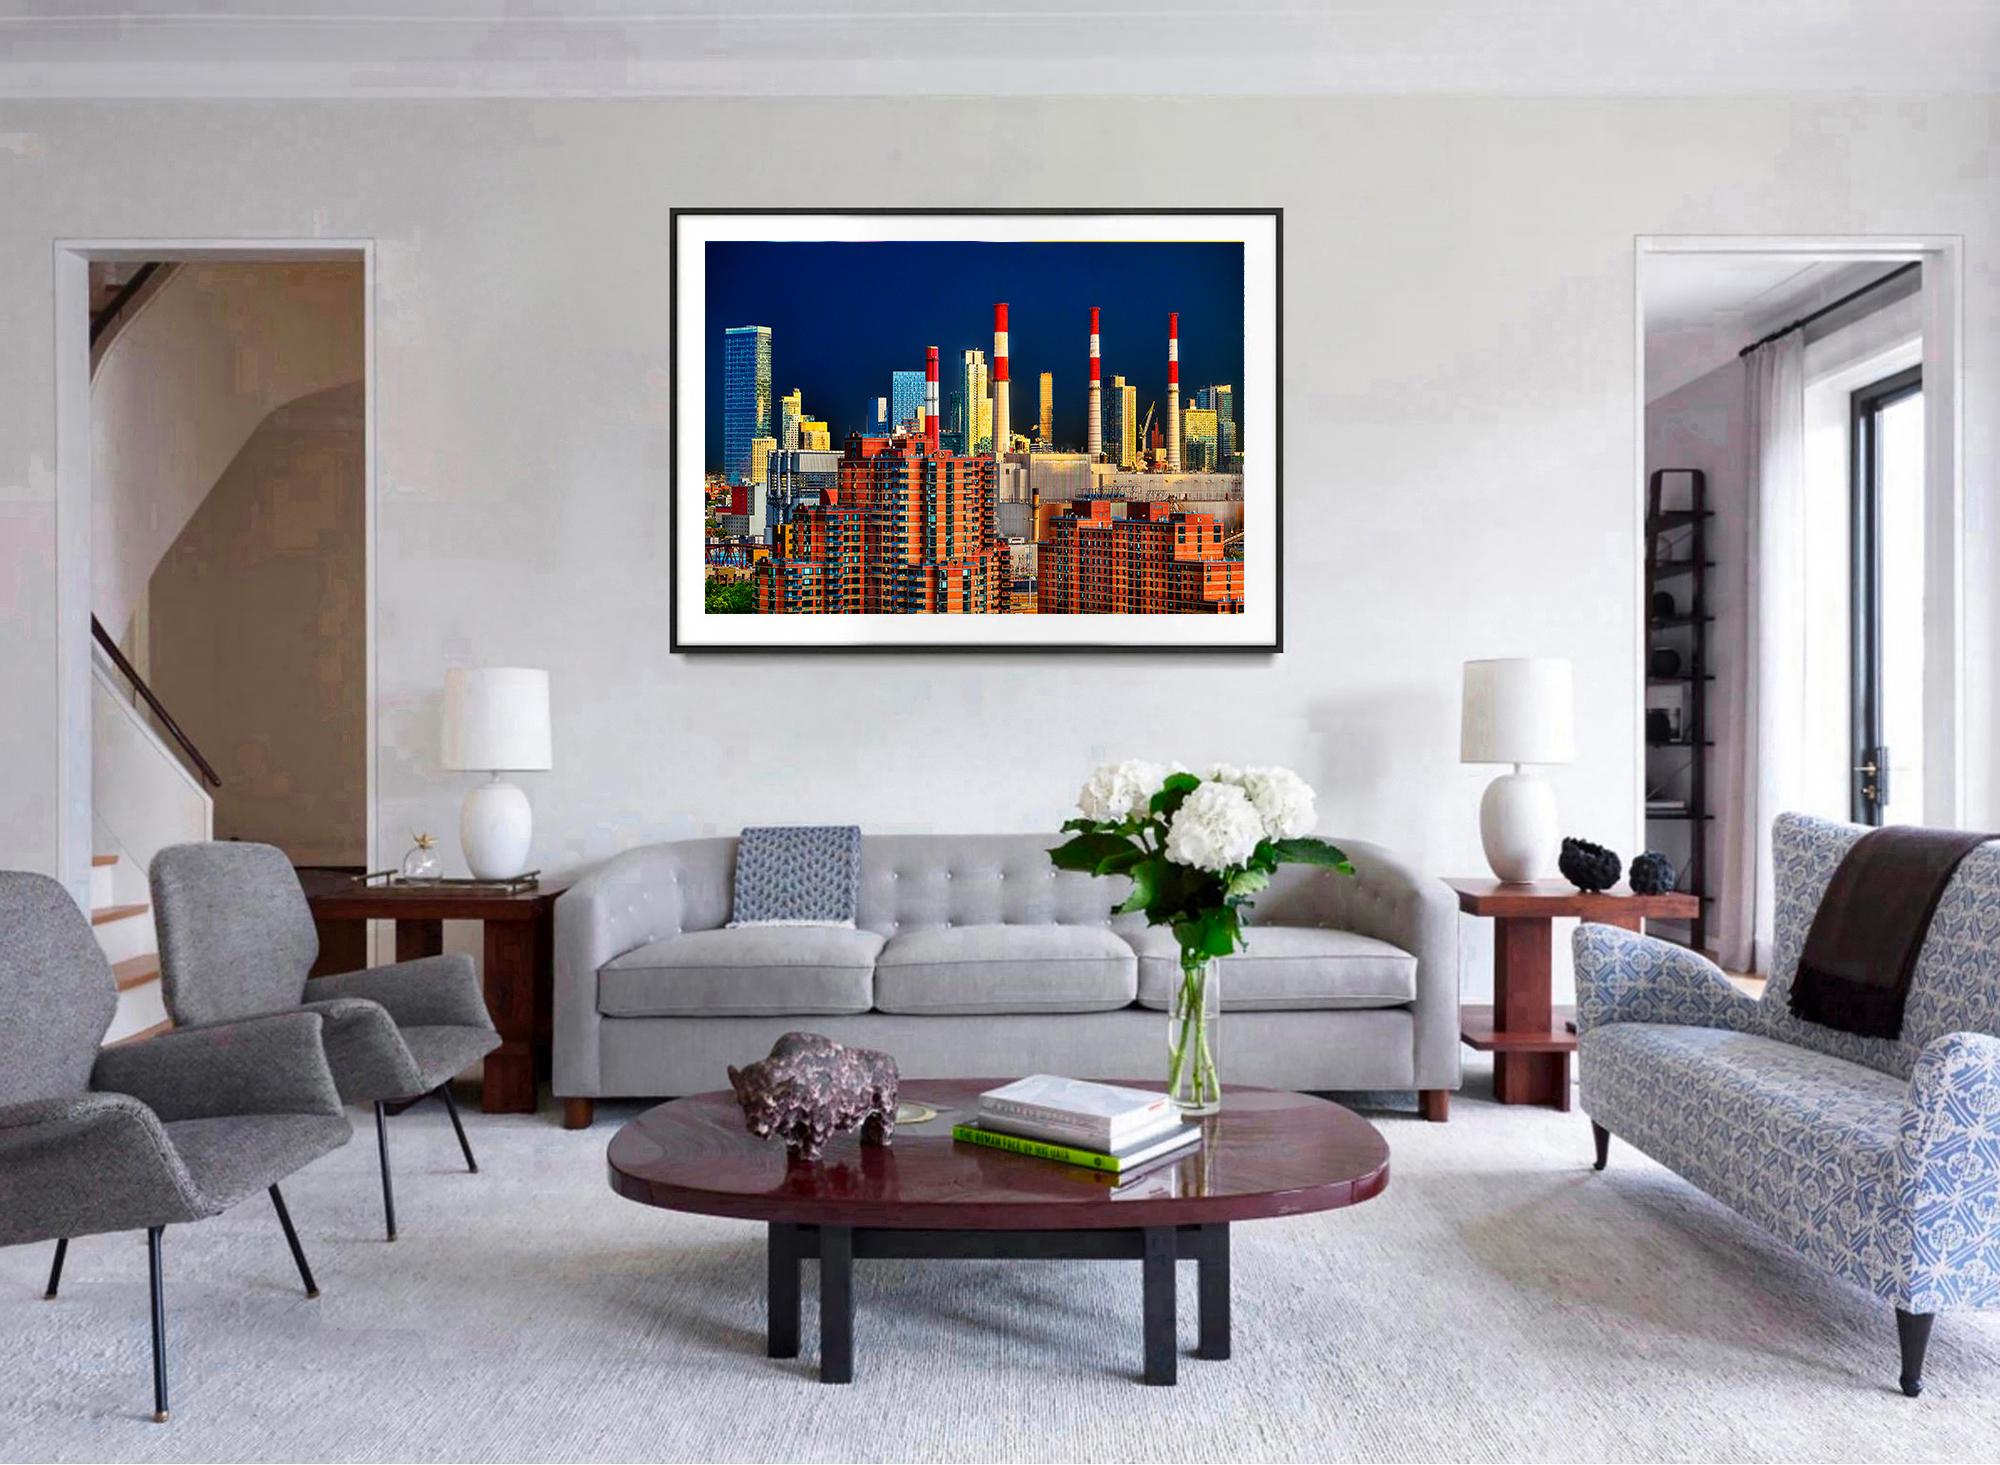 Perched high on the roof of an East Side highrise, Mitchell Funk merges the boroughs.  Funk creates a new New York City Skyline composed of buildings and smokestacks by selecting the right angle and waiting for a magically mystical light.  This is a